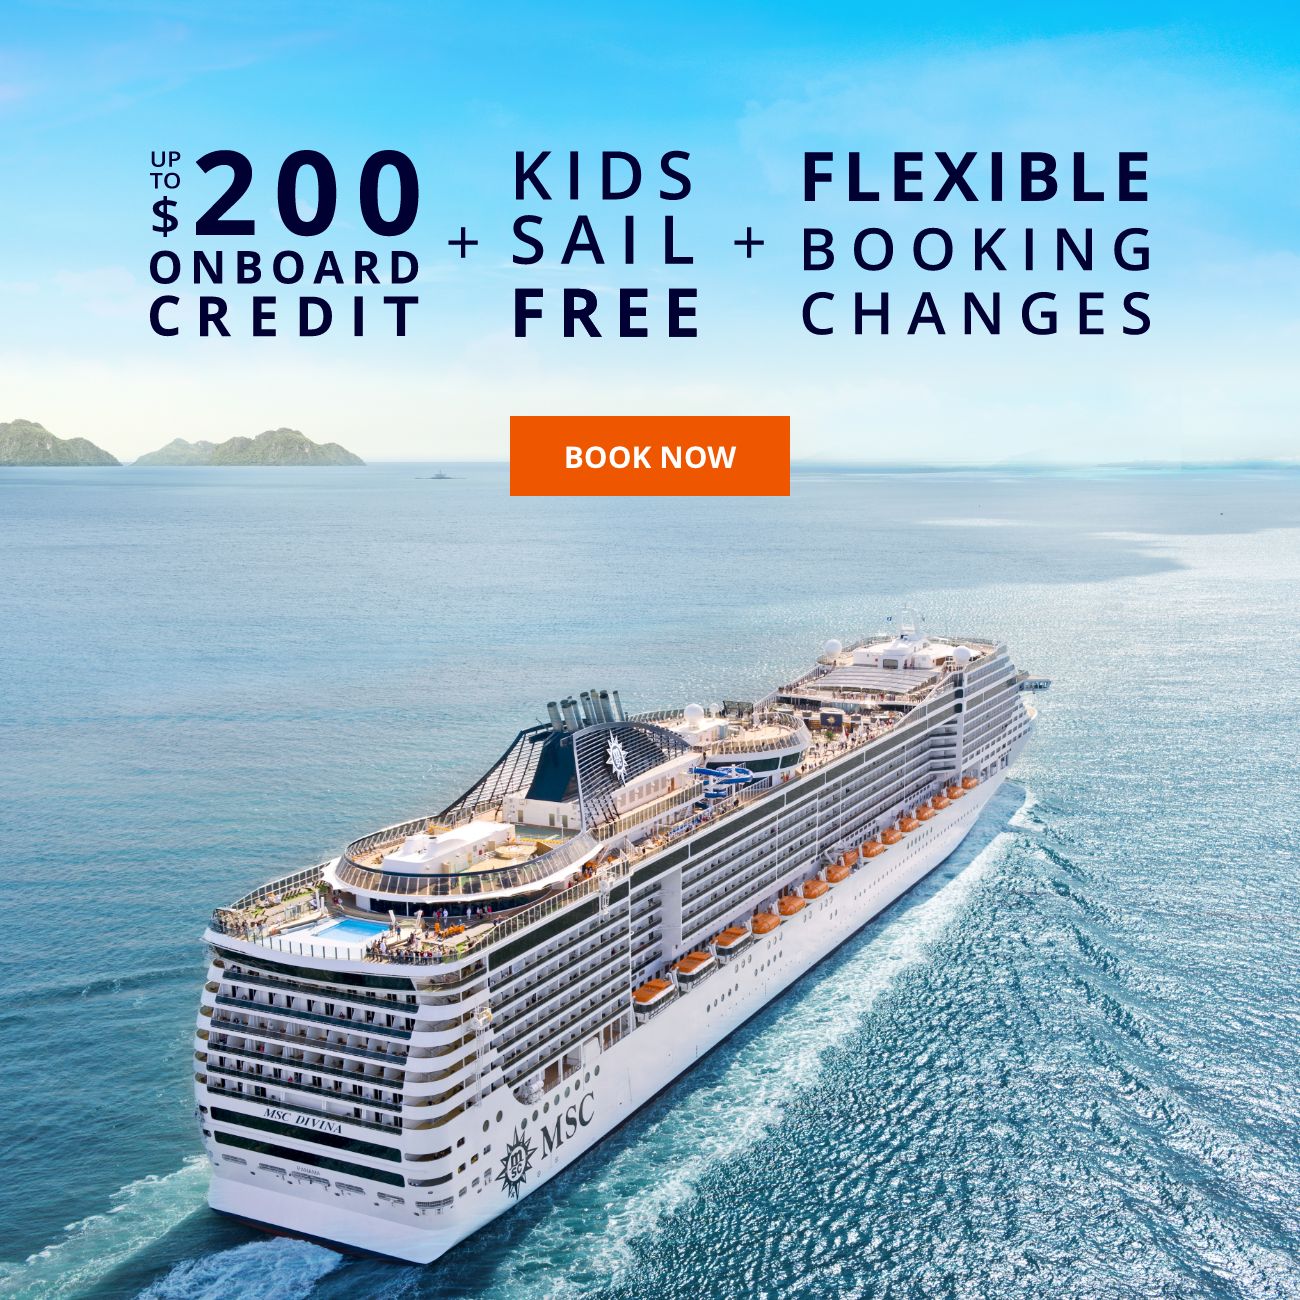 BOOK NOW FOR UP TO $200 ONBOARD                                      CREDIT + KIDS SAIL FREE + FLEXIBLE                                      BOOKING CHANGES